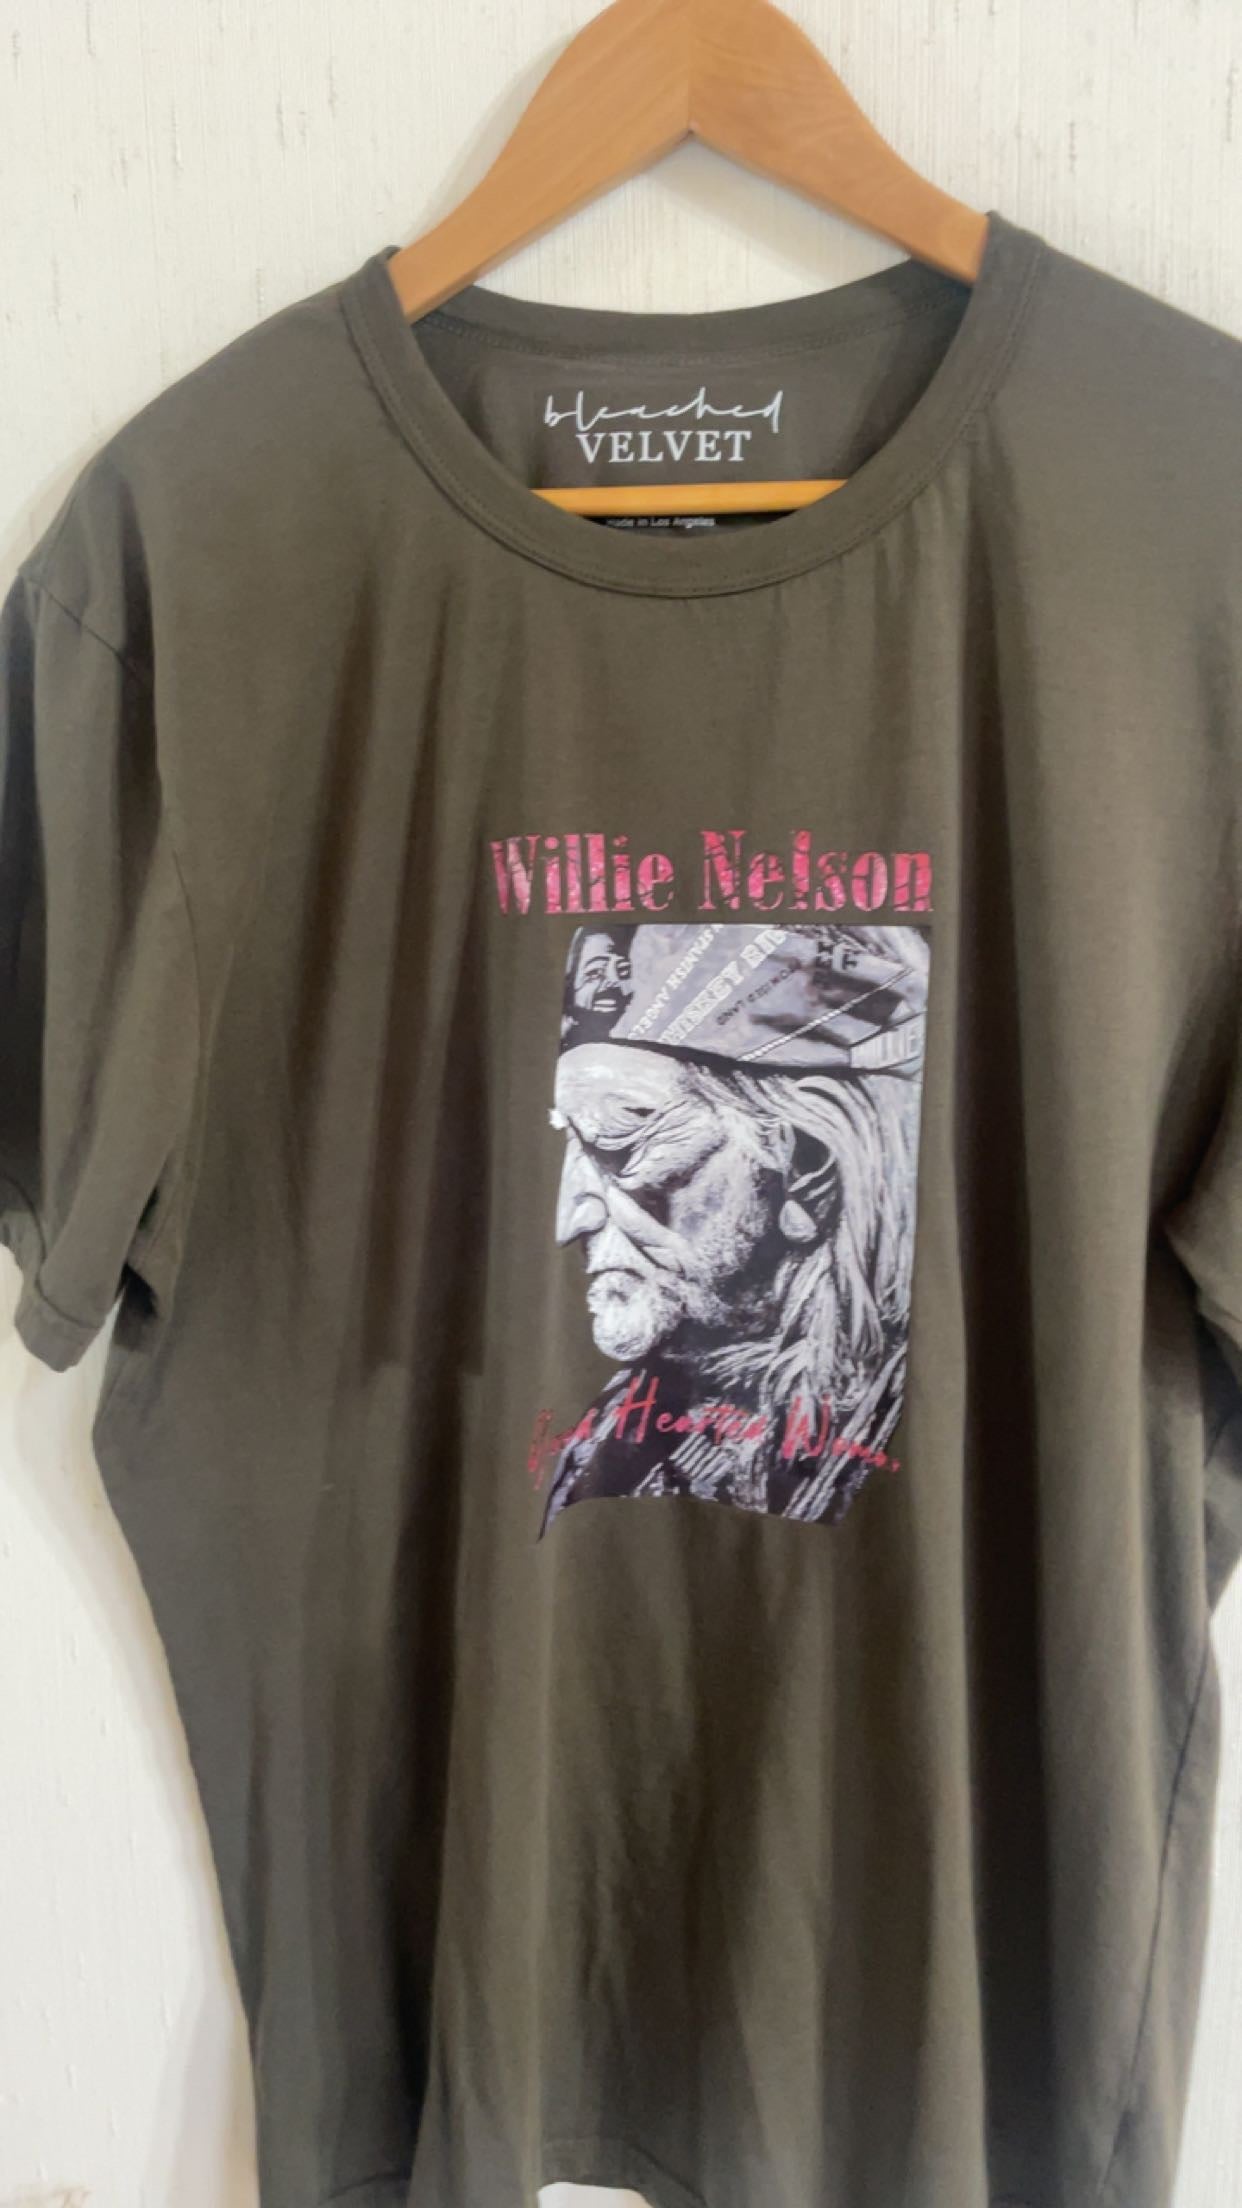 Game Changer Crew Tee - Willie Nelson A